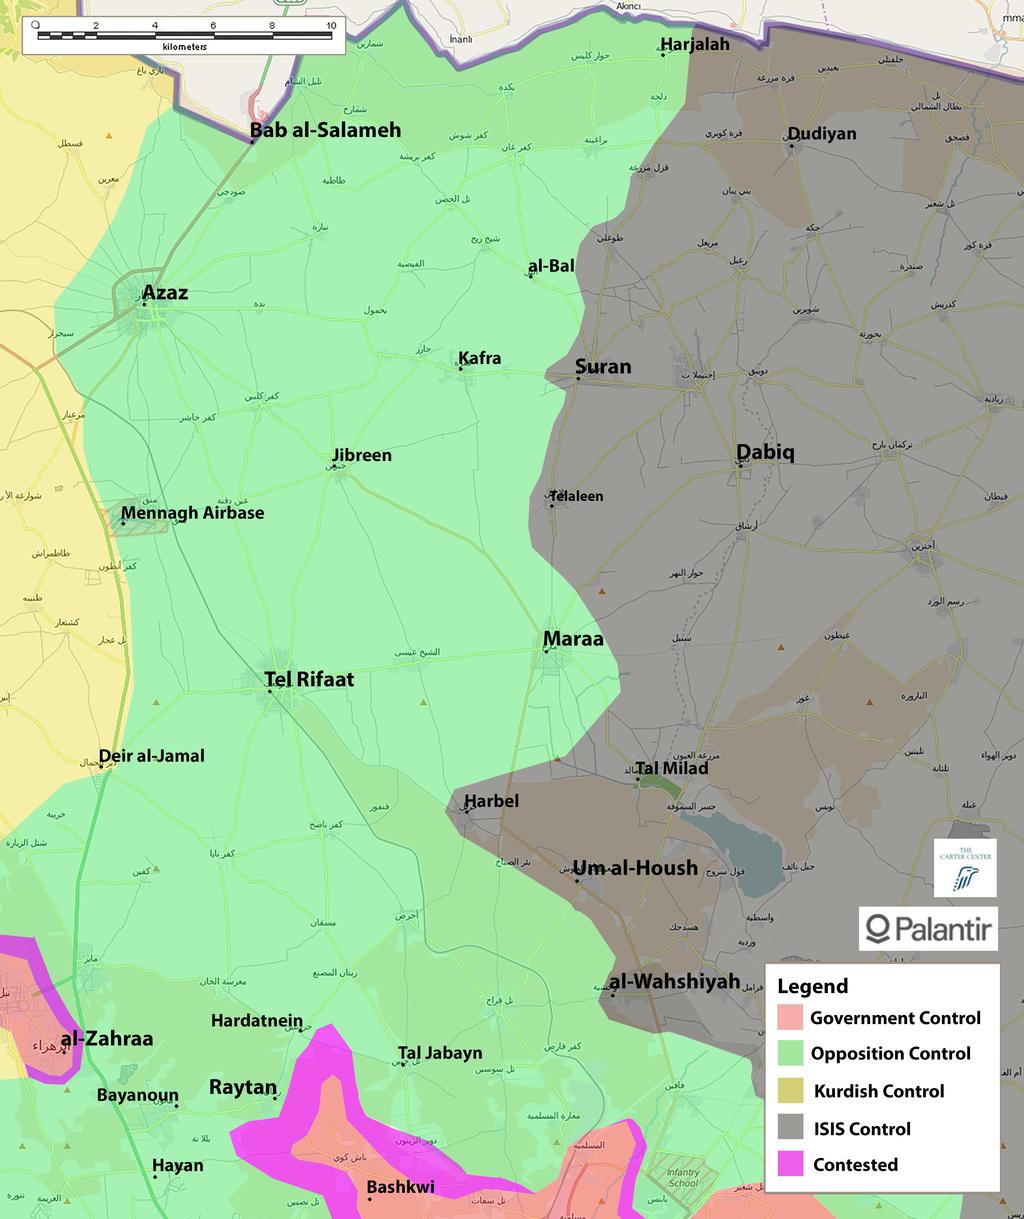 The Carter Center Syria Frontlines Update, October 9, 2015 following near total collapse in late 2014 after they were targeted in Idlib by JAN.